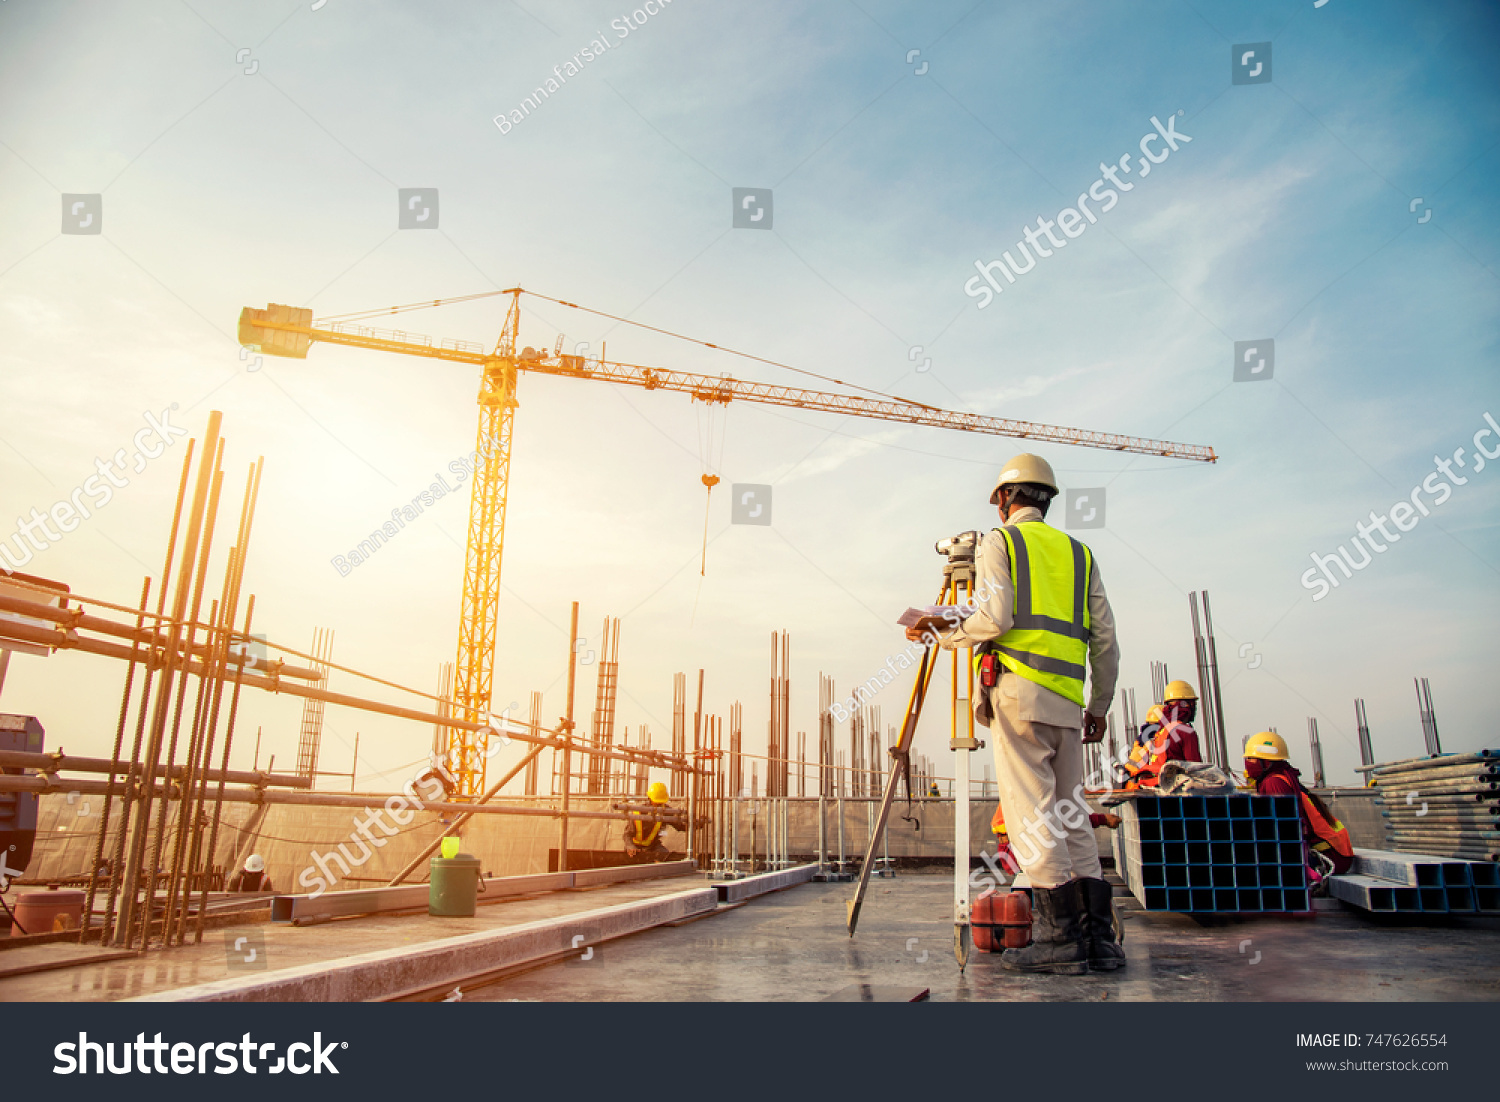 Surveyor builder Engineer with theodolite transit equipment at construction site outdoors during surveying work #747626554